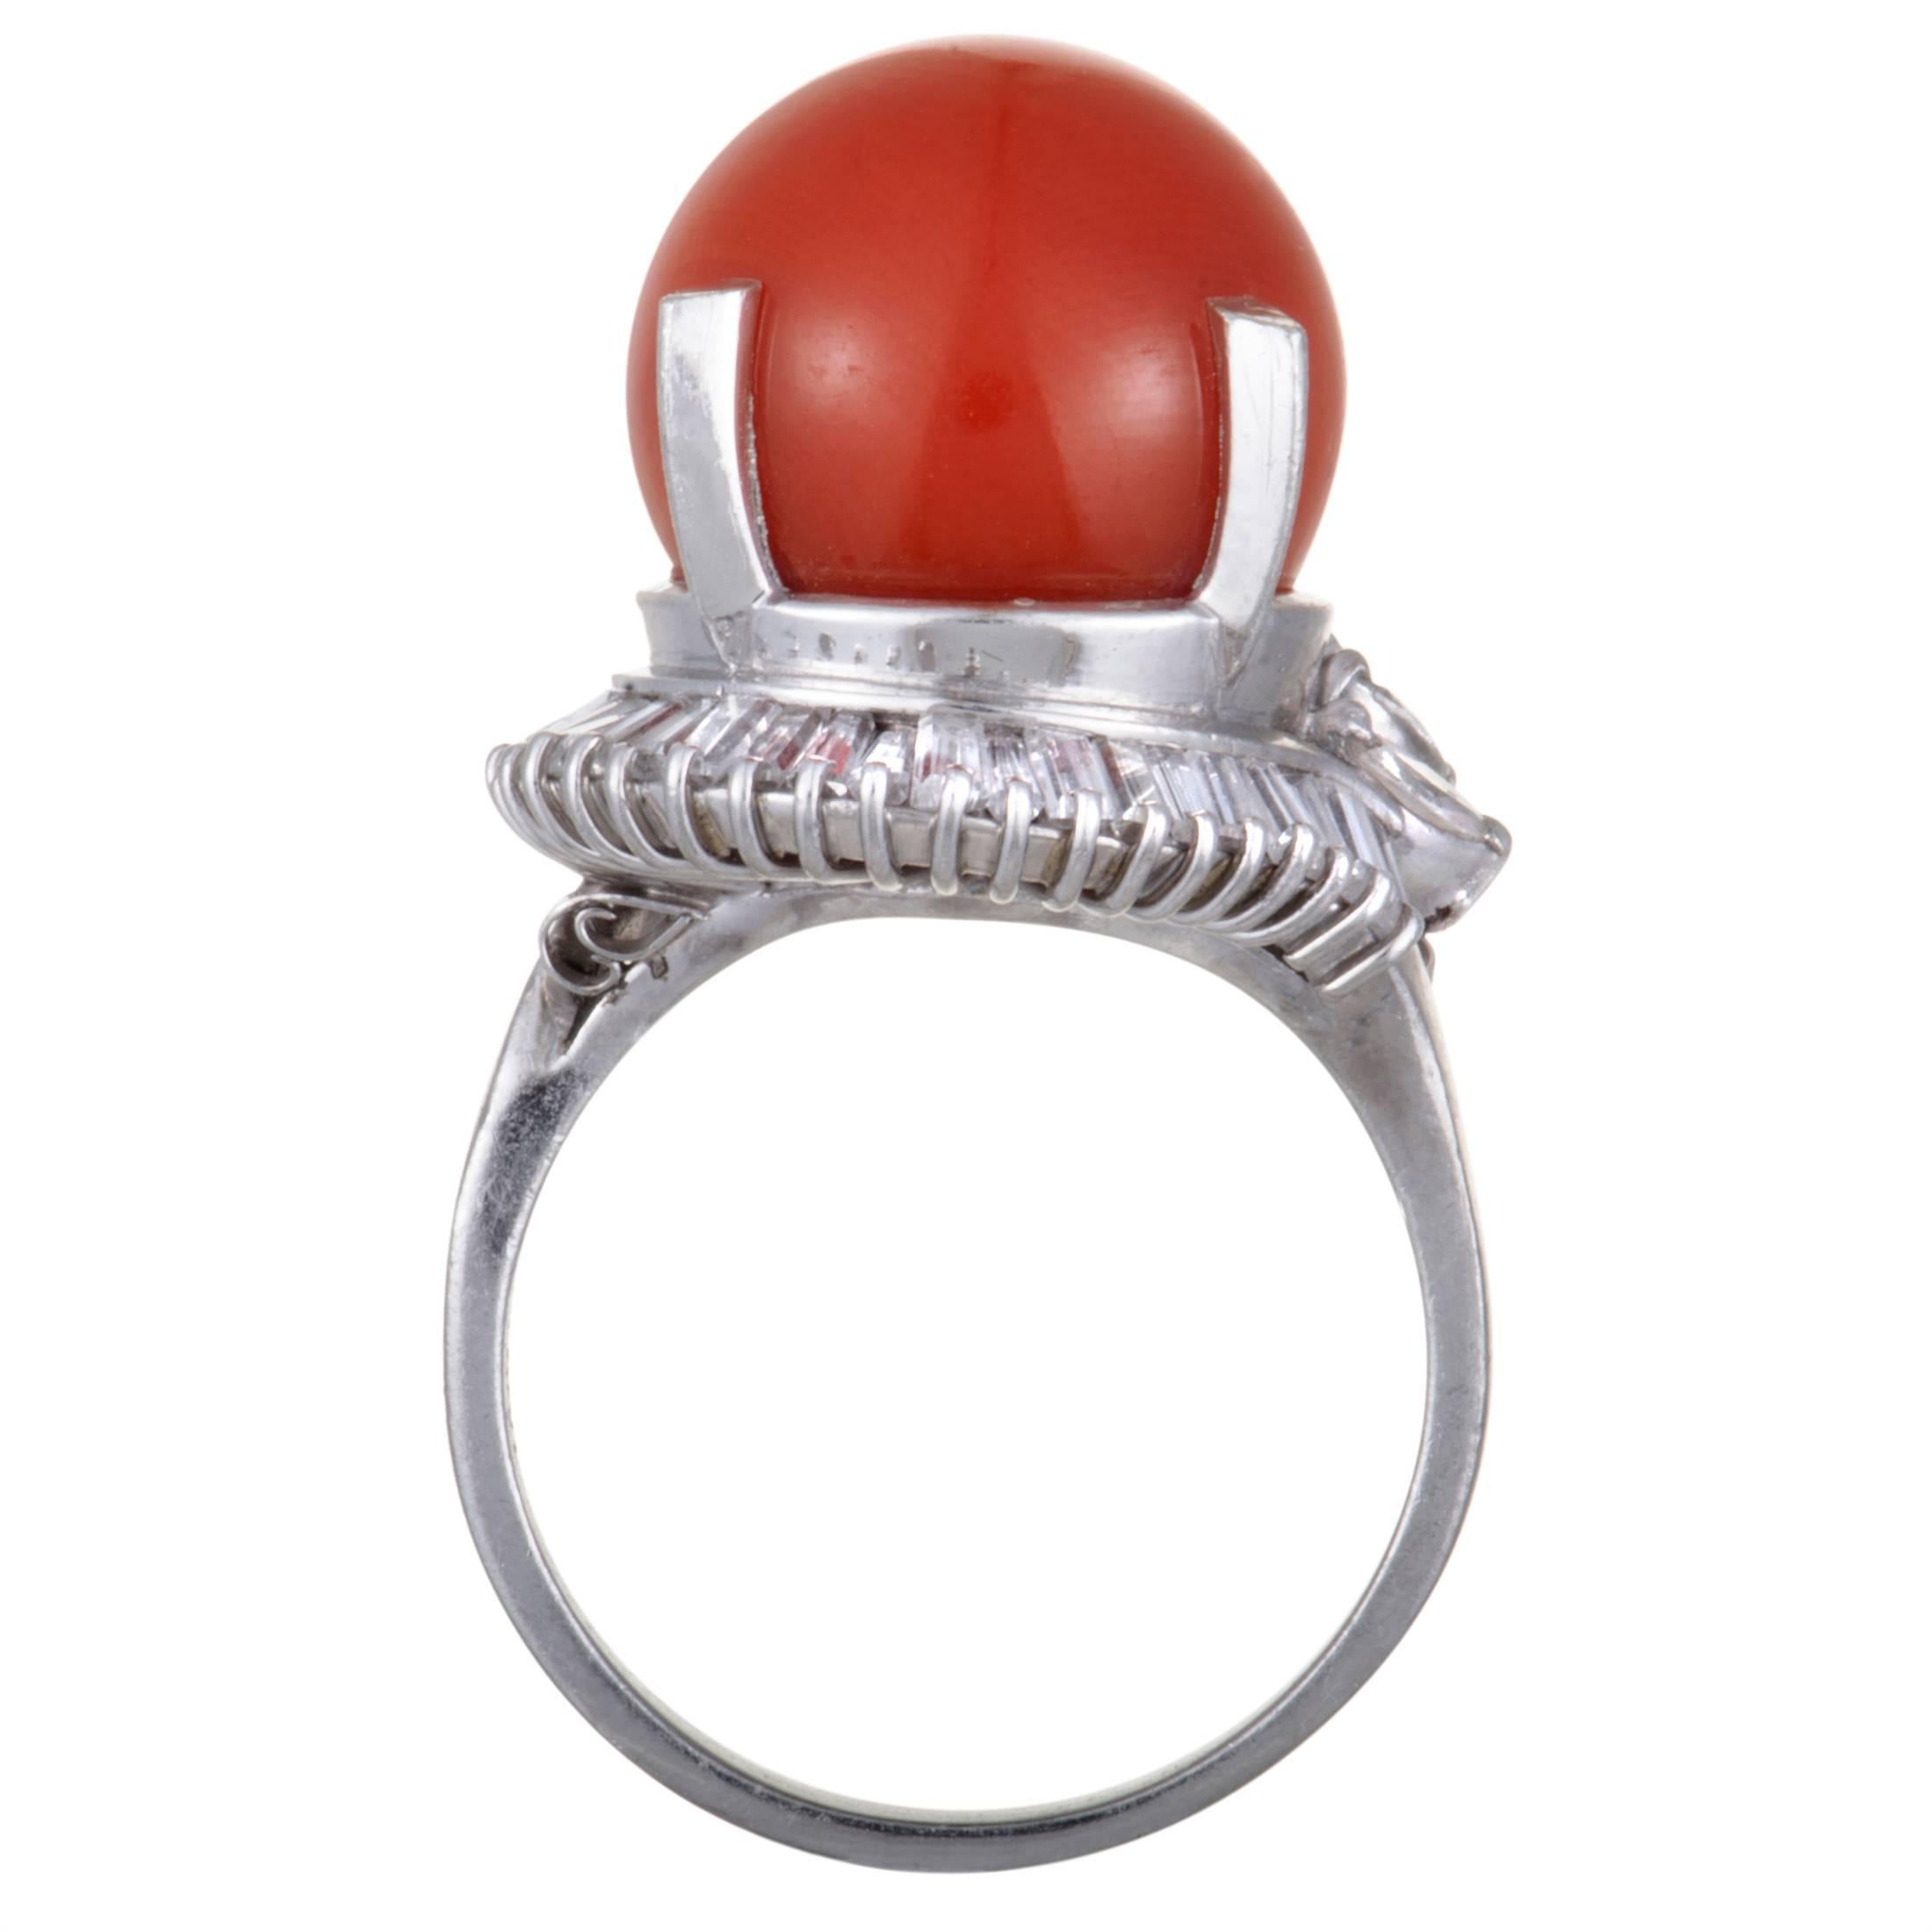 The diversely cut diamonds accentuate in a splendidly luxurious manner the red coral in this superb ring. The ring is beautifully crafted from prestigious platinum and boasts a total of 1.23 carats of diamonds.
Ring Top Dimensions: 20mm x 18mm
Band: